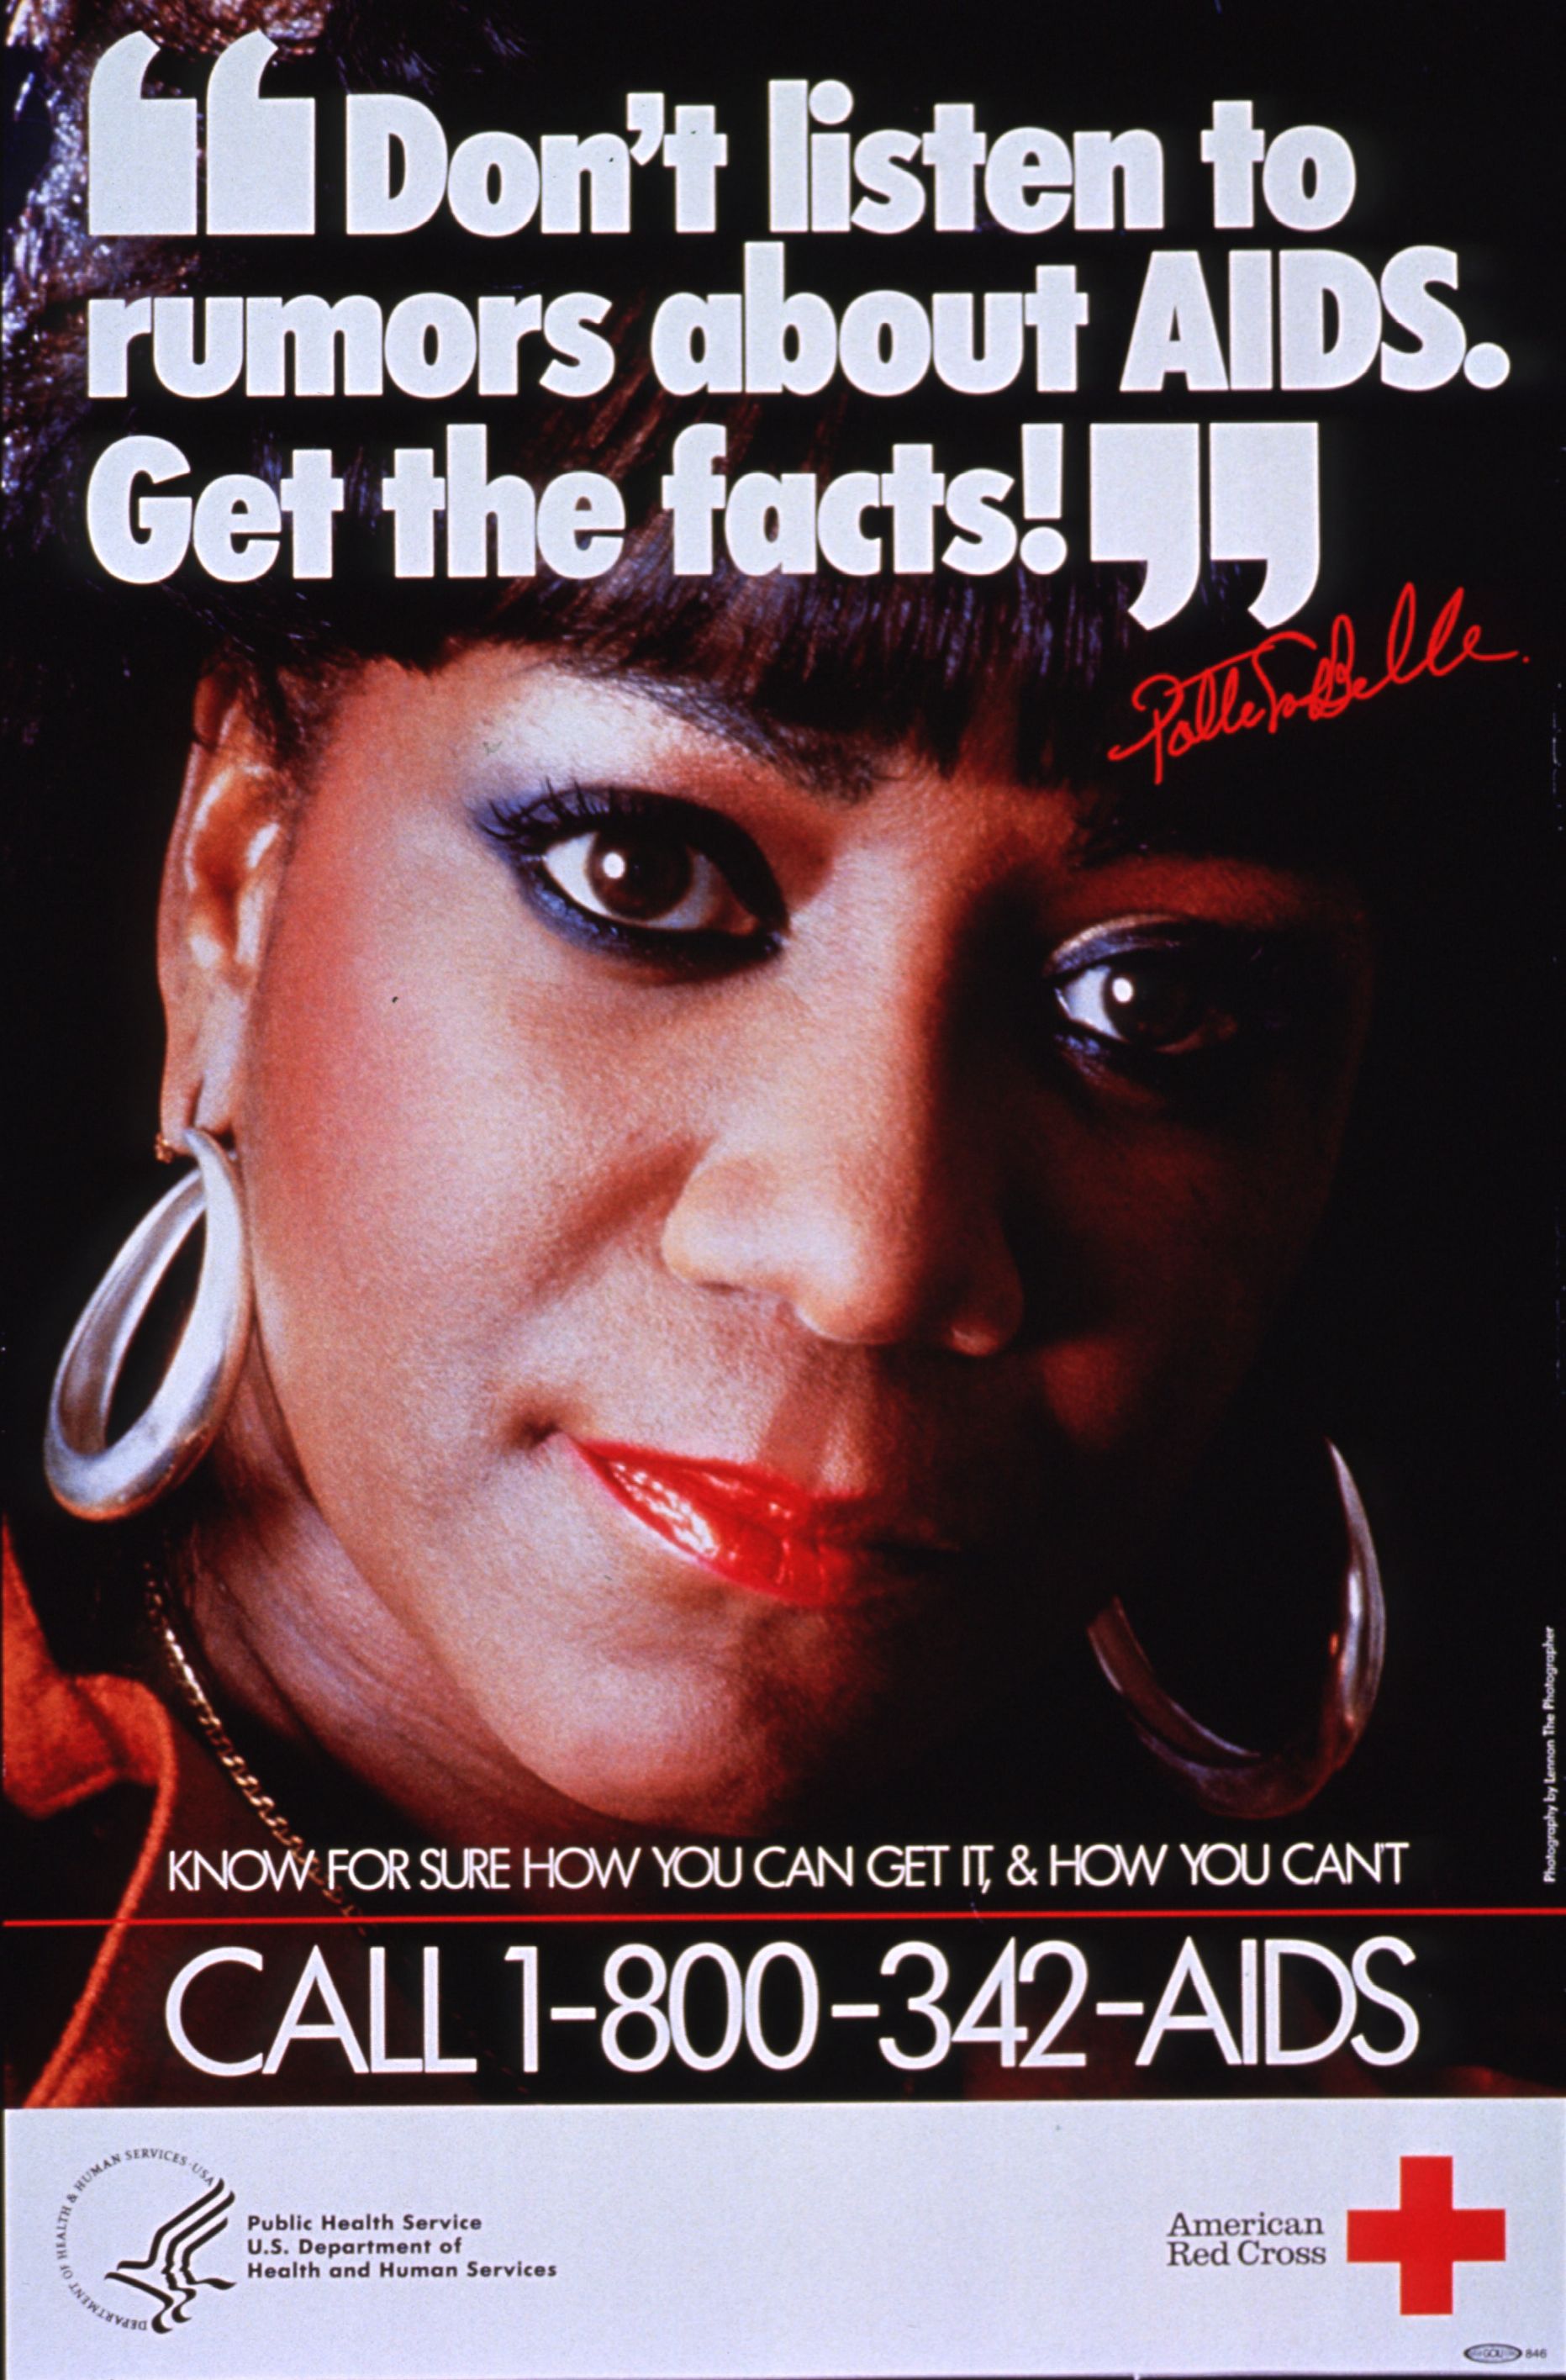 Public health aids awareness campaign poster featuring a celebrity endorsement encouraging people to learn the facts about aids.